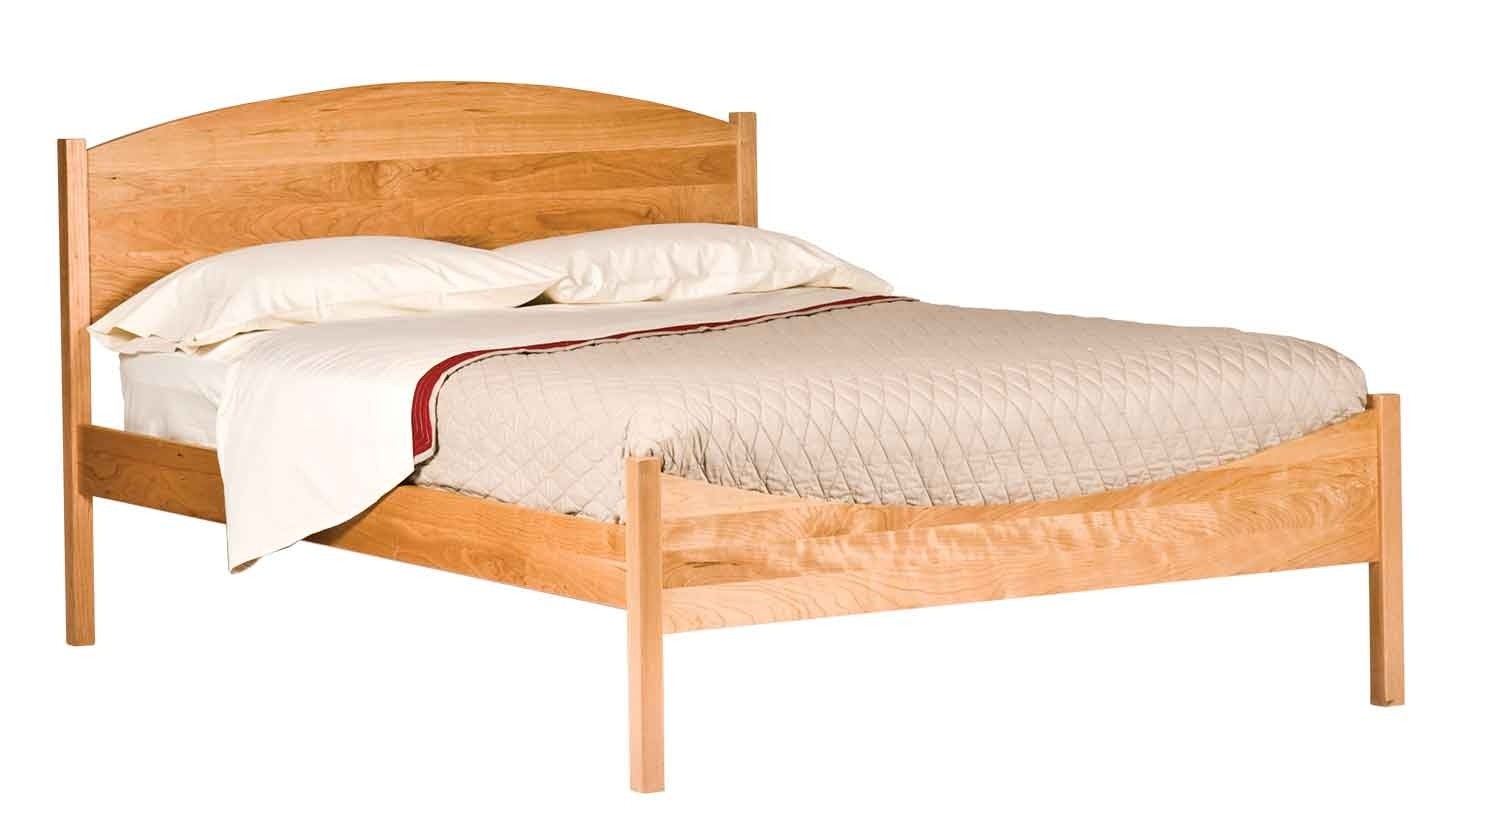 Circle furniture woodforms shaker bed moondance cherry